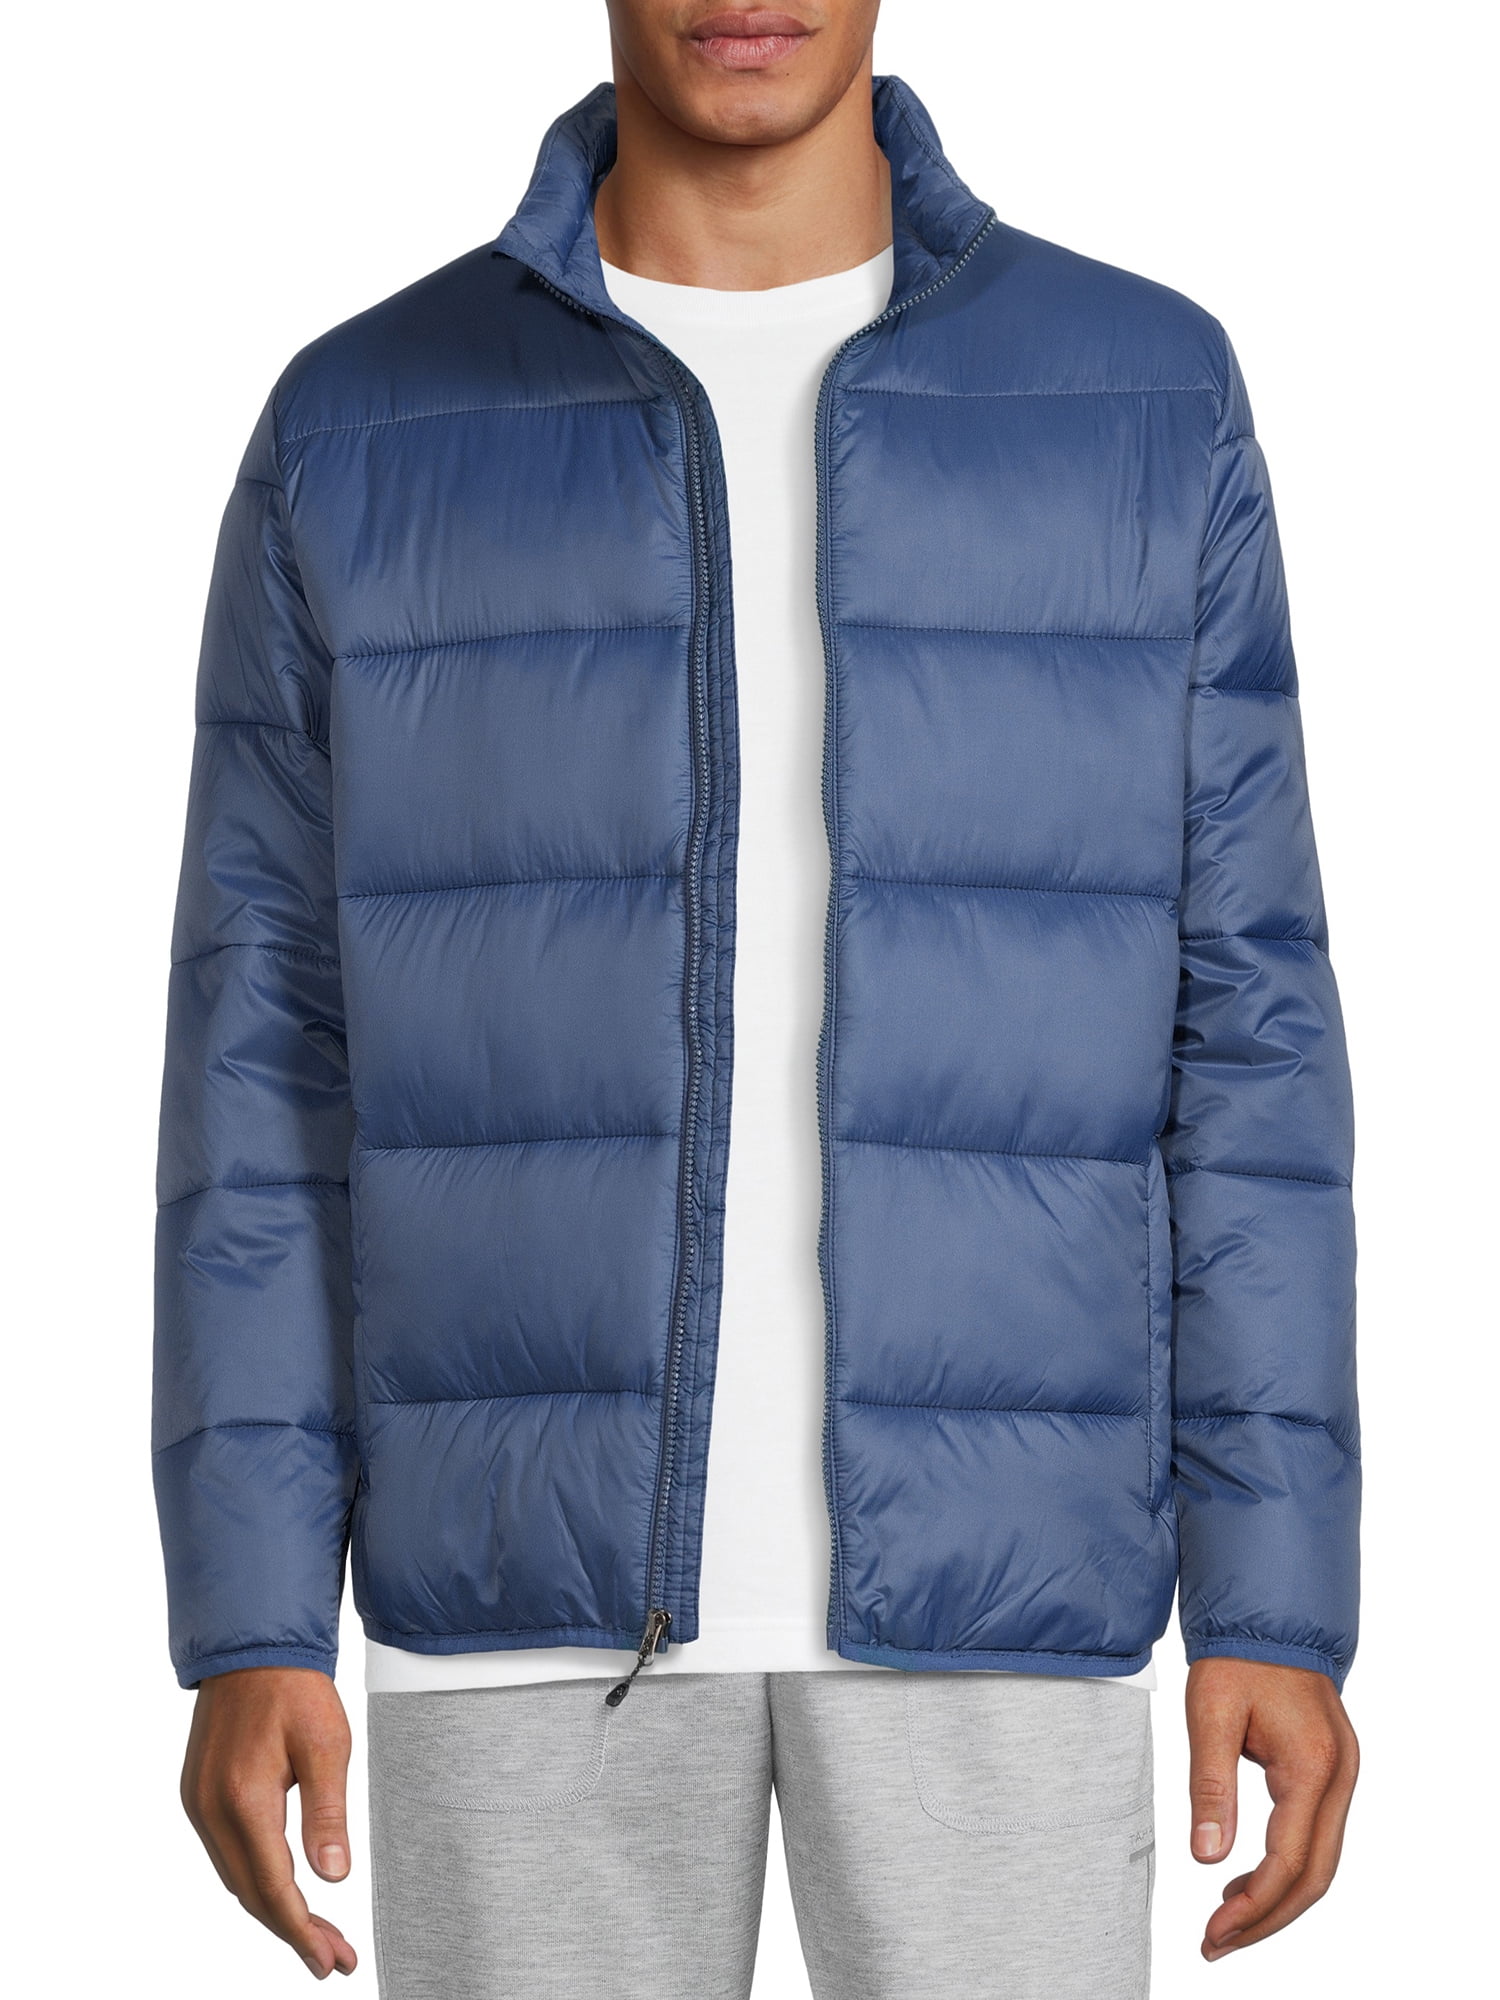 Swiss Tech Men's And Big Men's Puffer Jacket, Up To Size 3XL | lupon.gov.ph